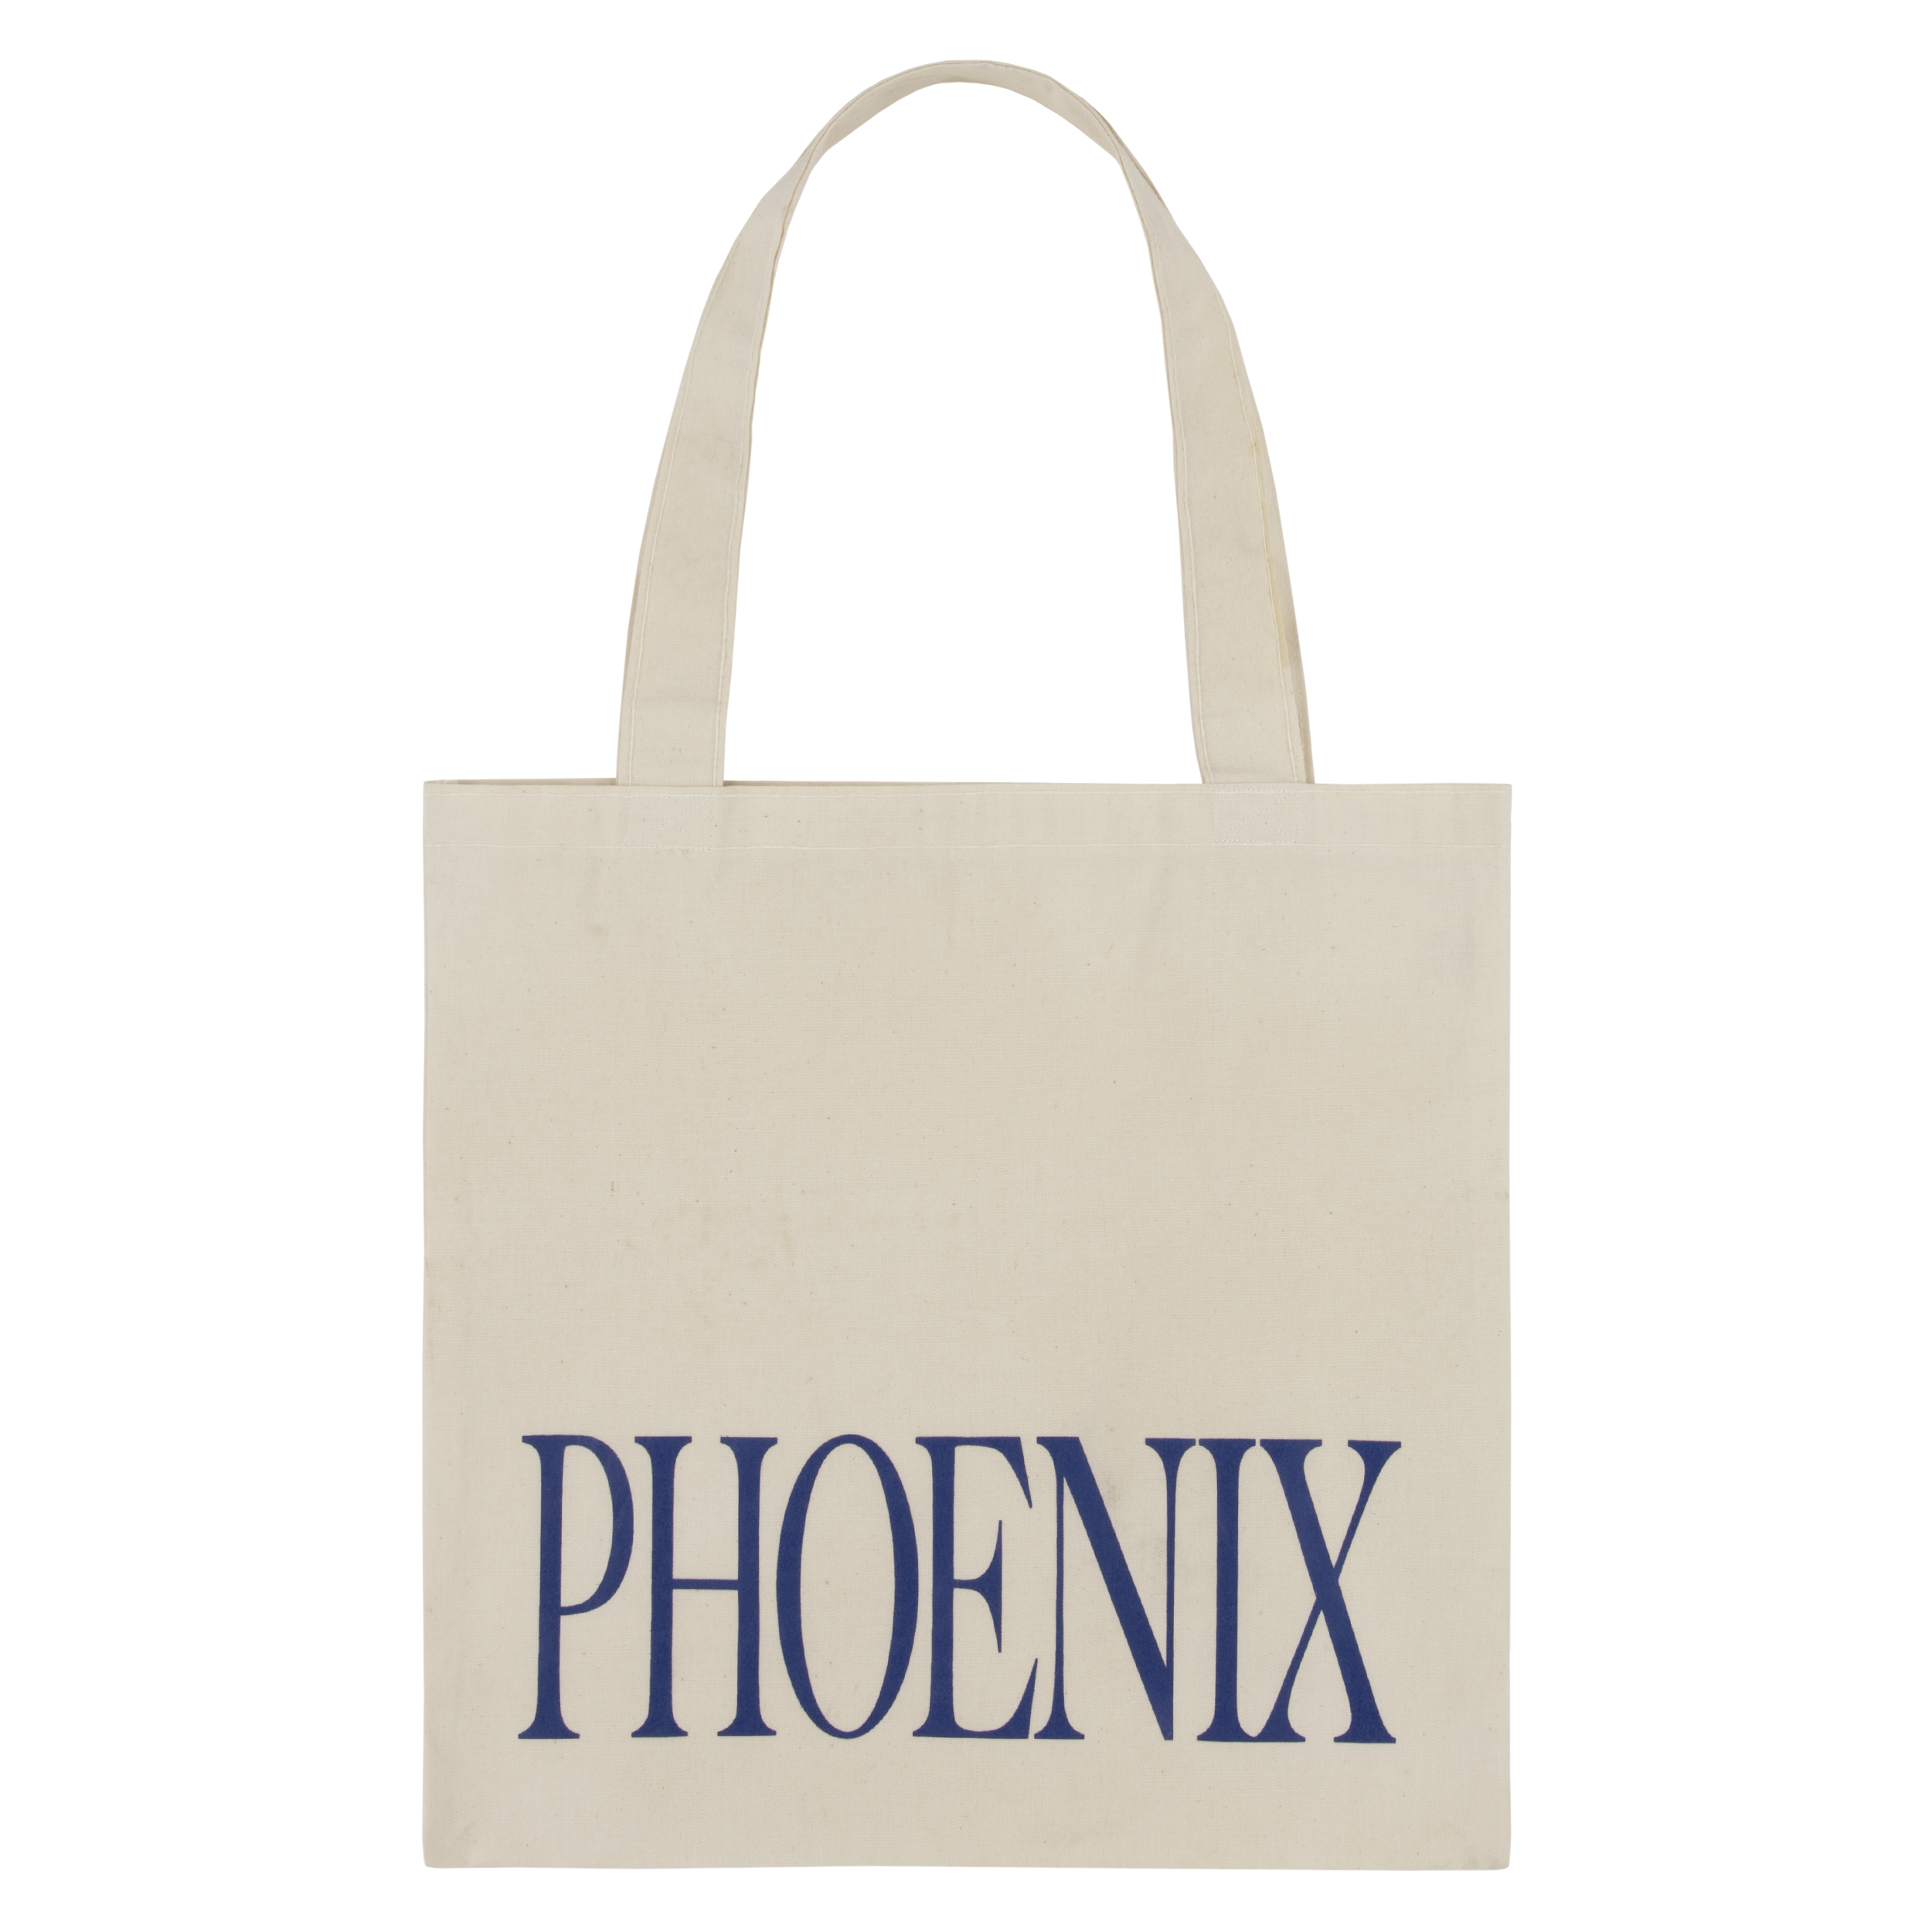 DELUXE TOTE BAG